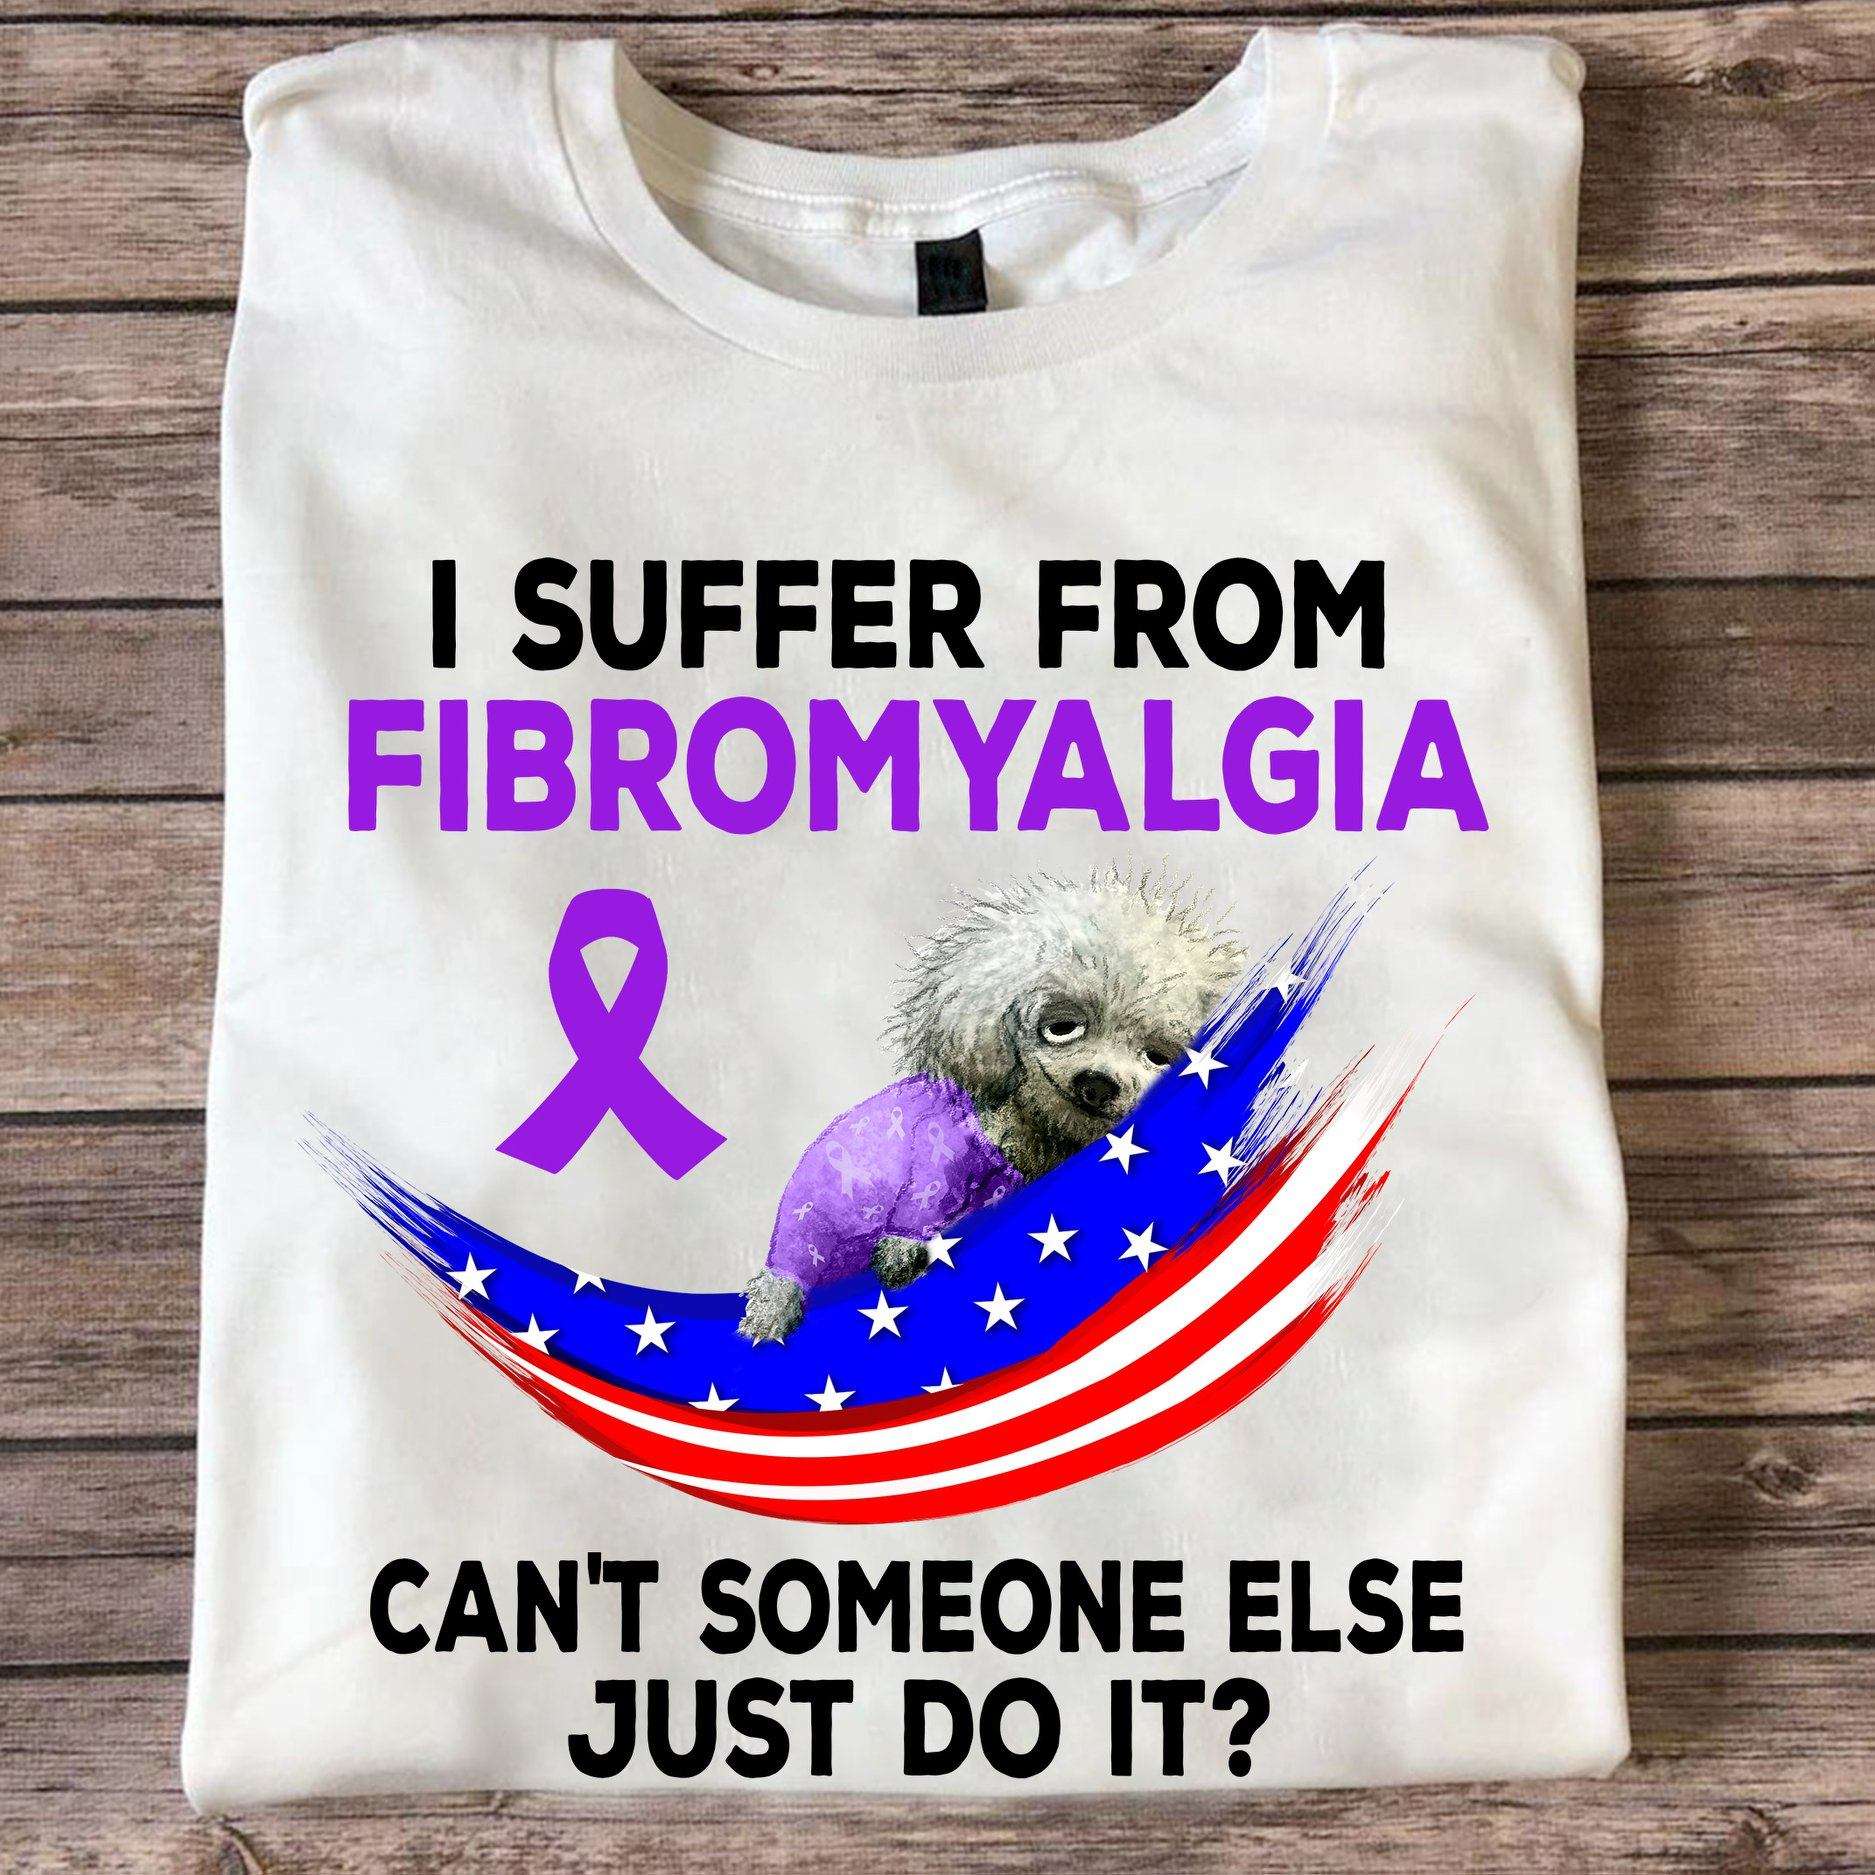 America Fibromyalgia Dog - I suffer from fibromyalgia can't someone else just do it?